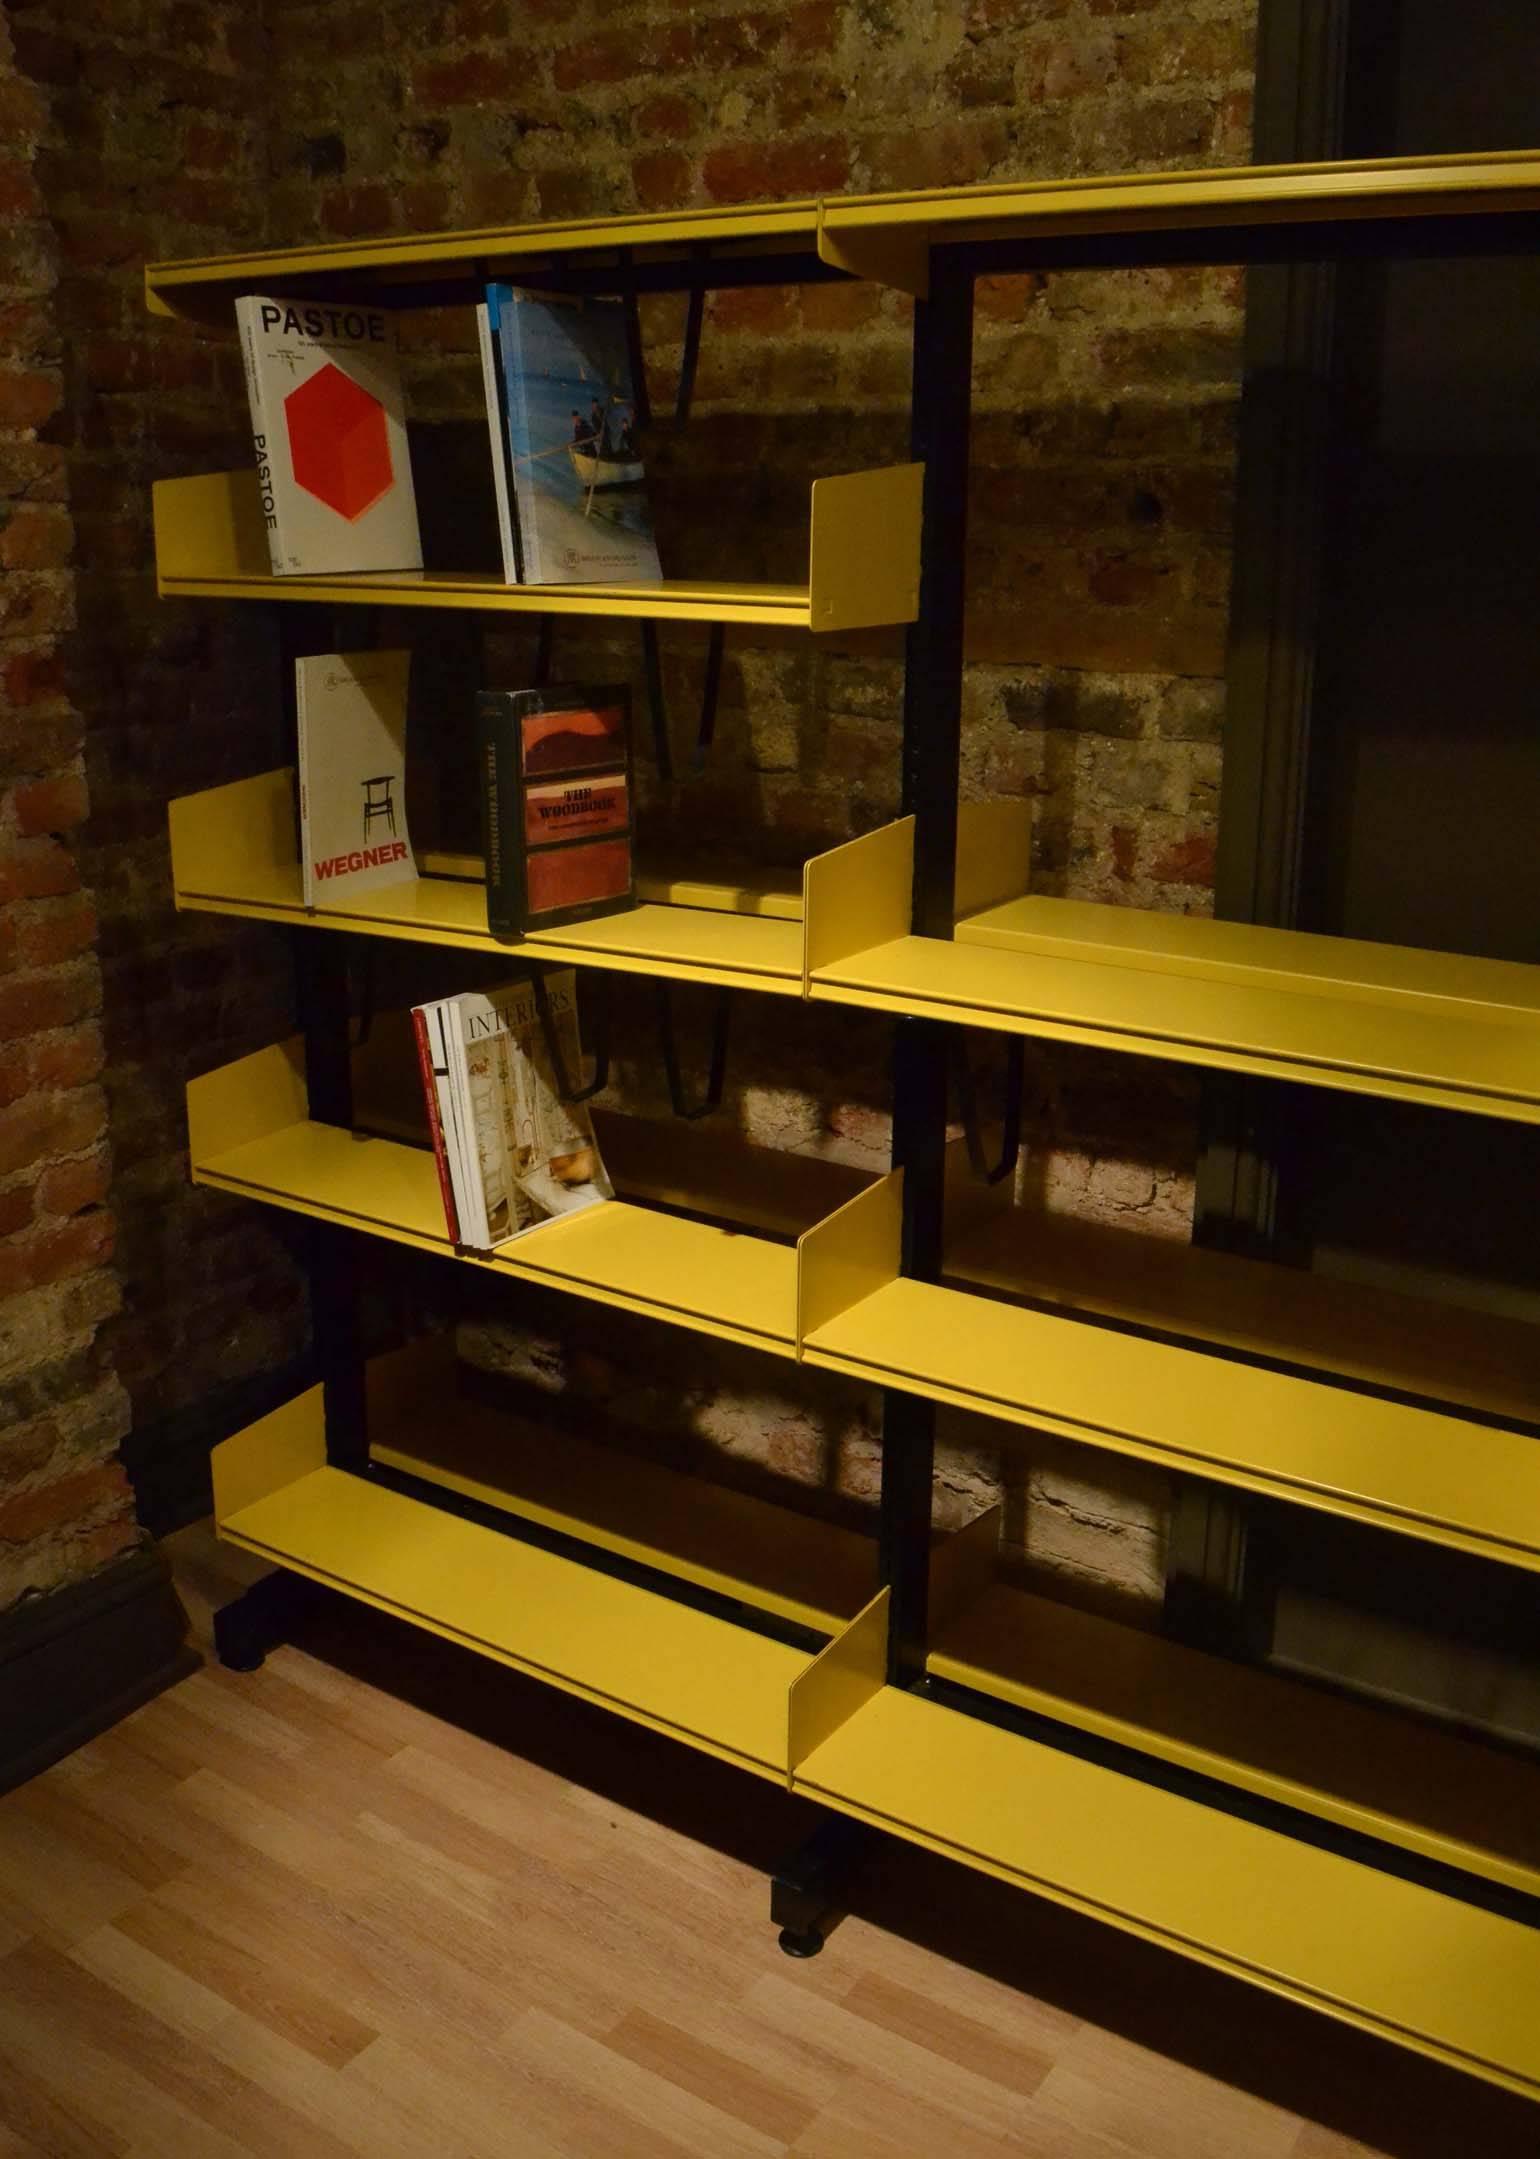 Vintage metal Reska library shelving was developed in 1949 by Rudolph Koreska in Denmark. Free standing black metal cantilever structure with mustard yellow metal double-sided book shelves. The system can be used as a room divider as well as